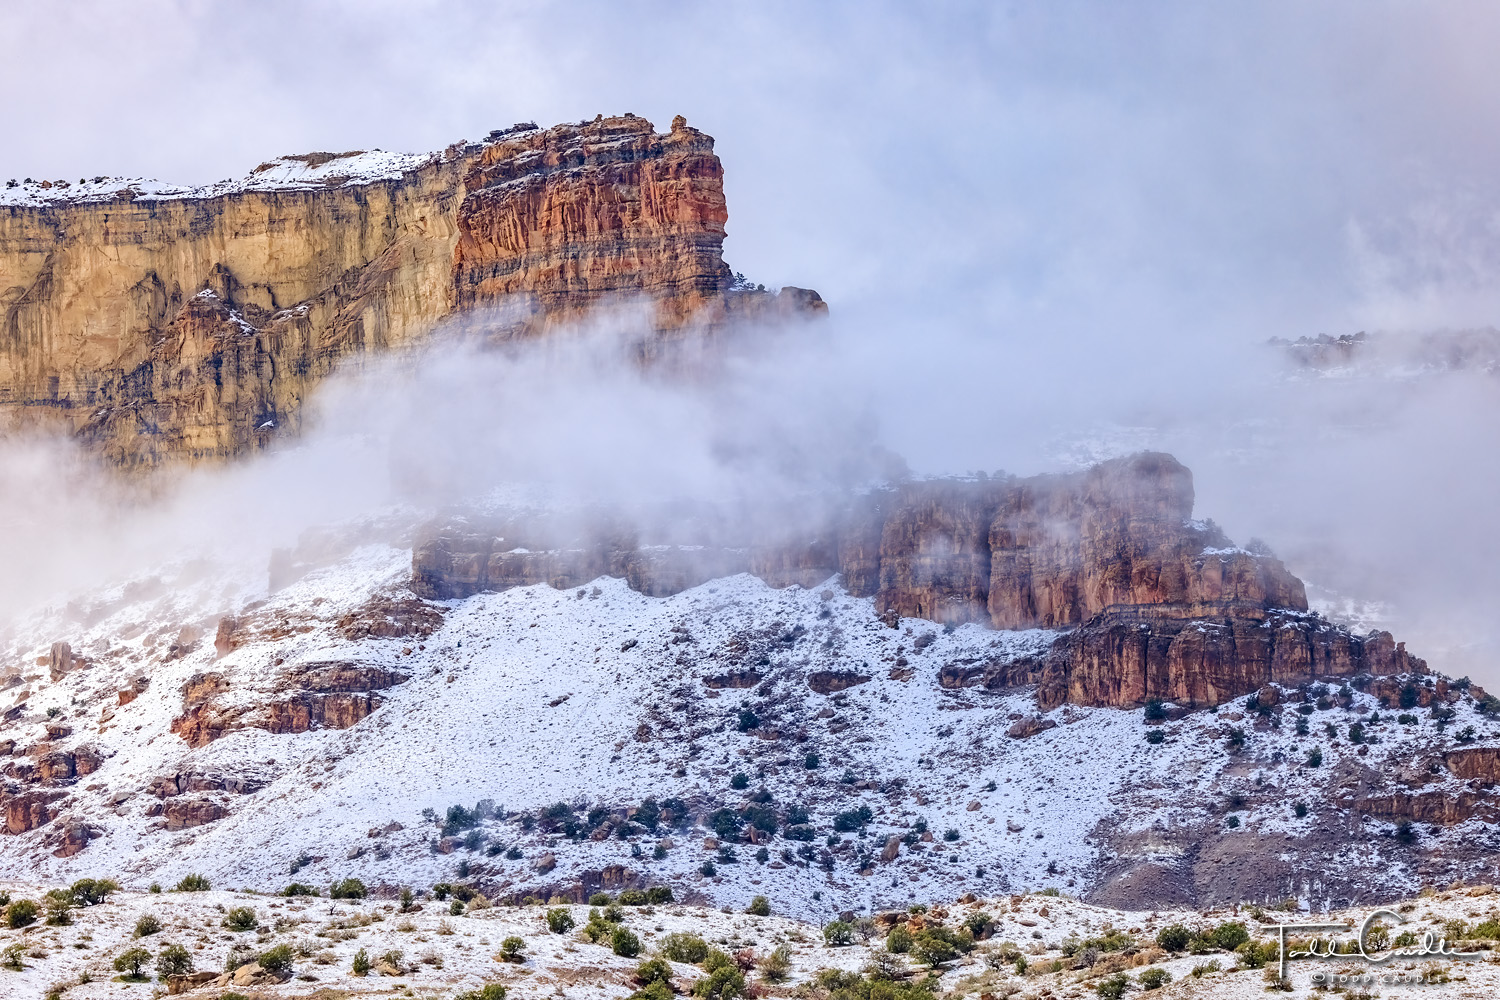 Clouds and fog part to reveal mesas as an early-spring snowstorm departs Colorado's rugged Western Slope canyon country.